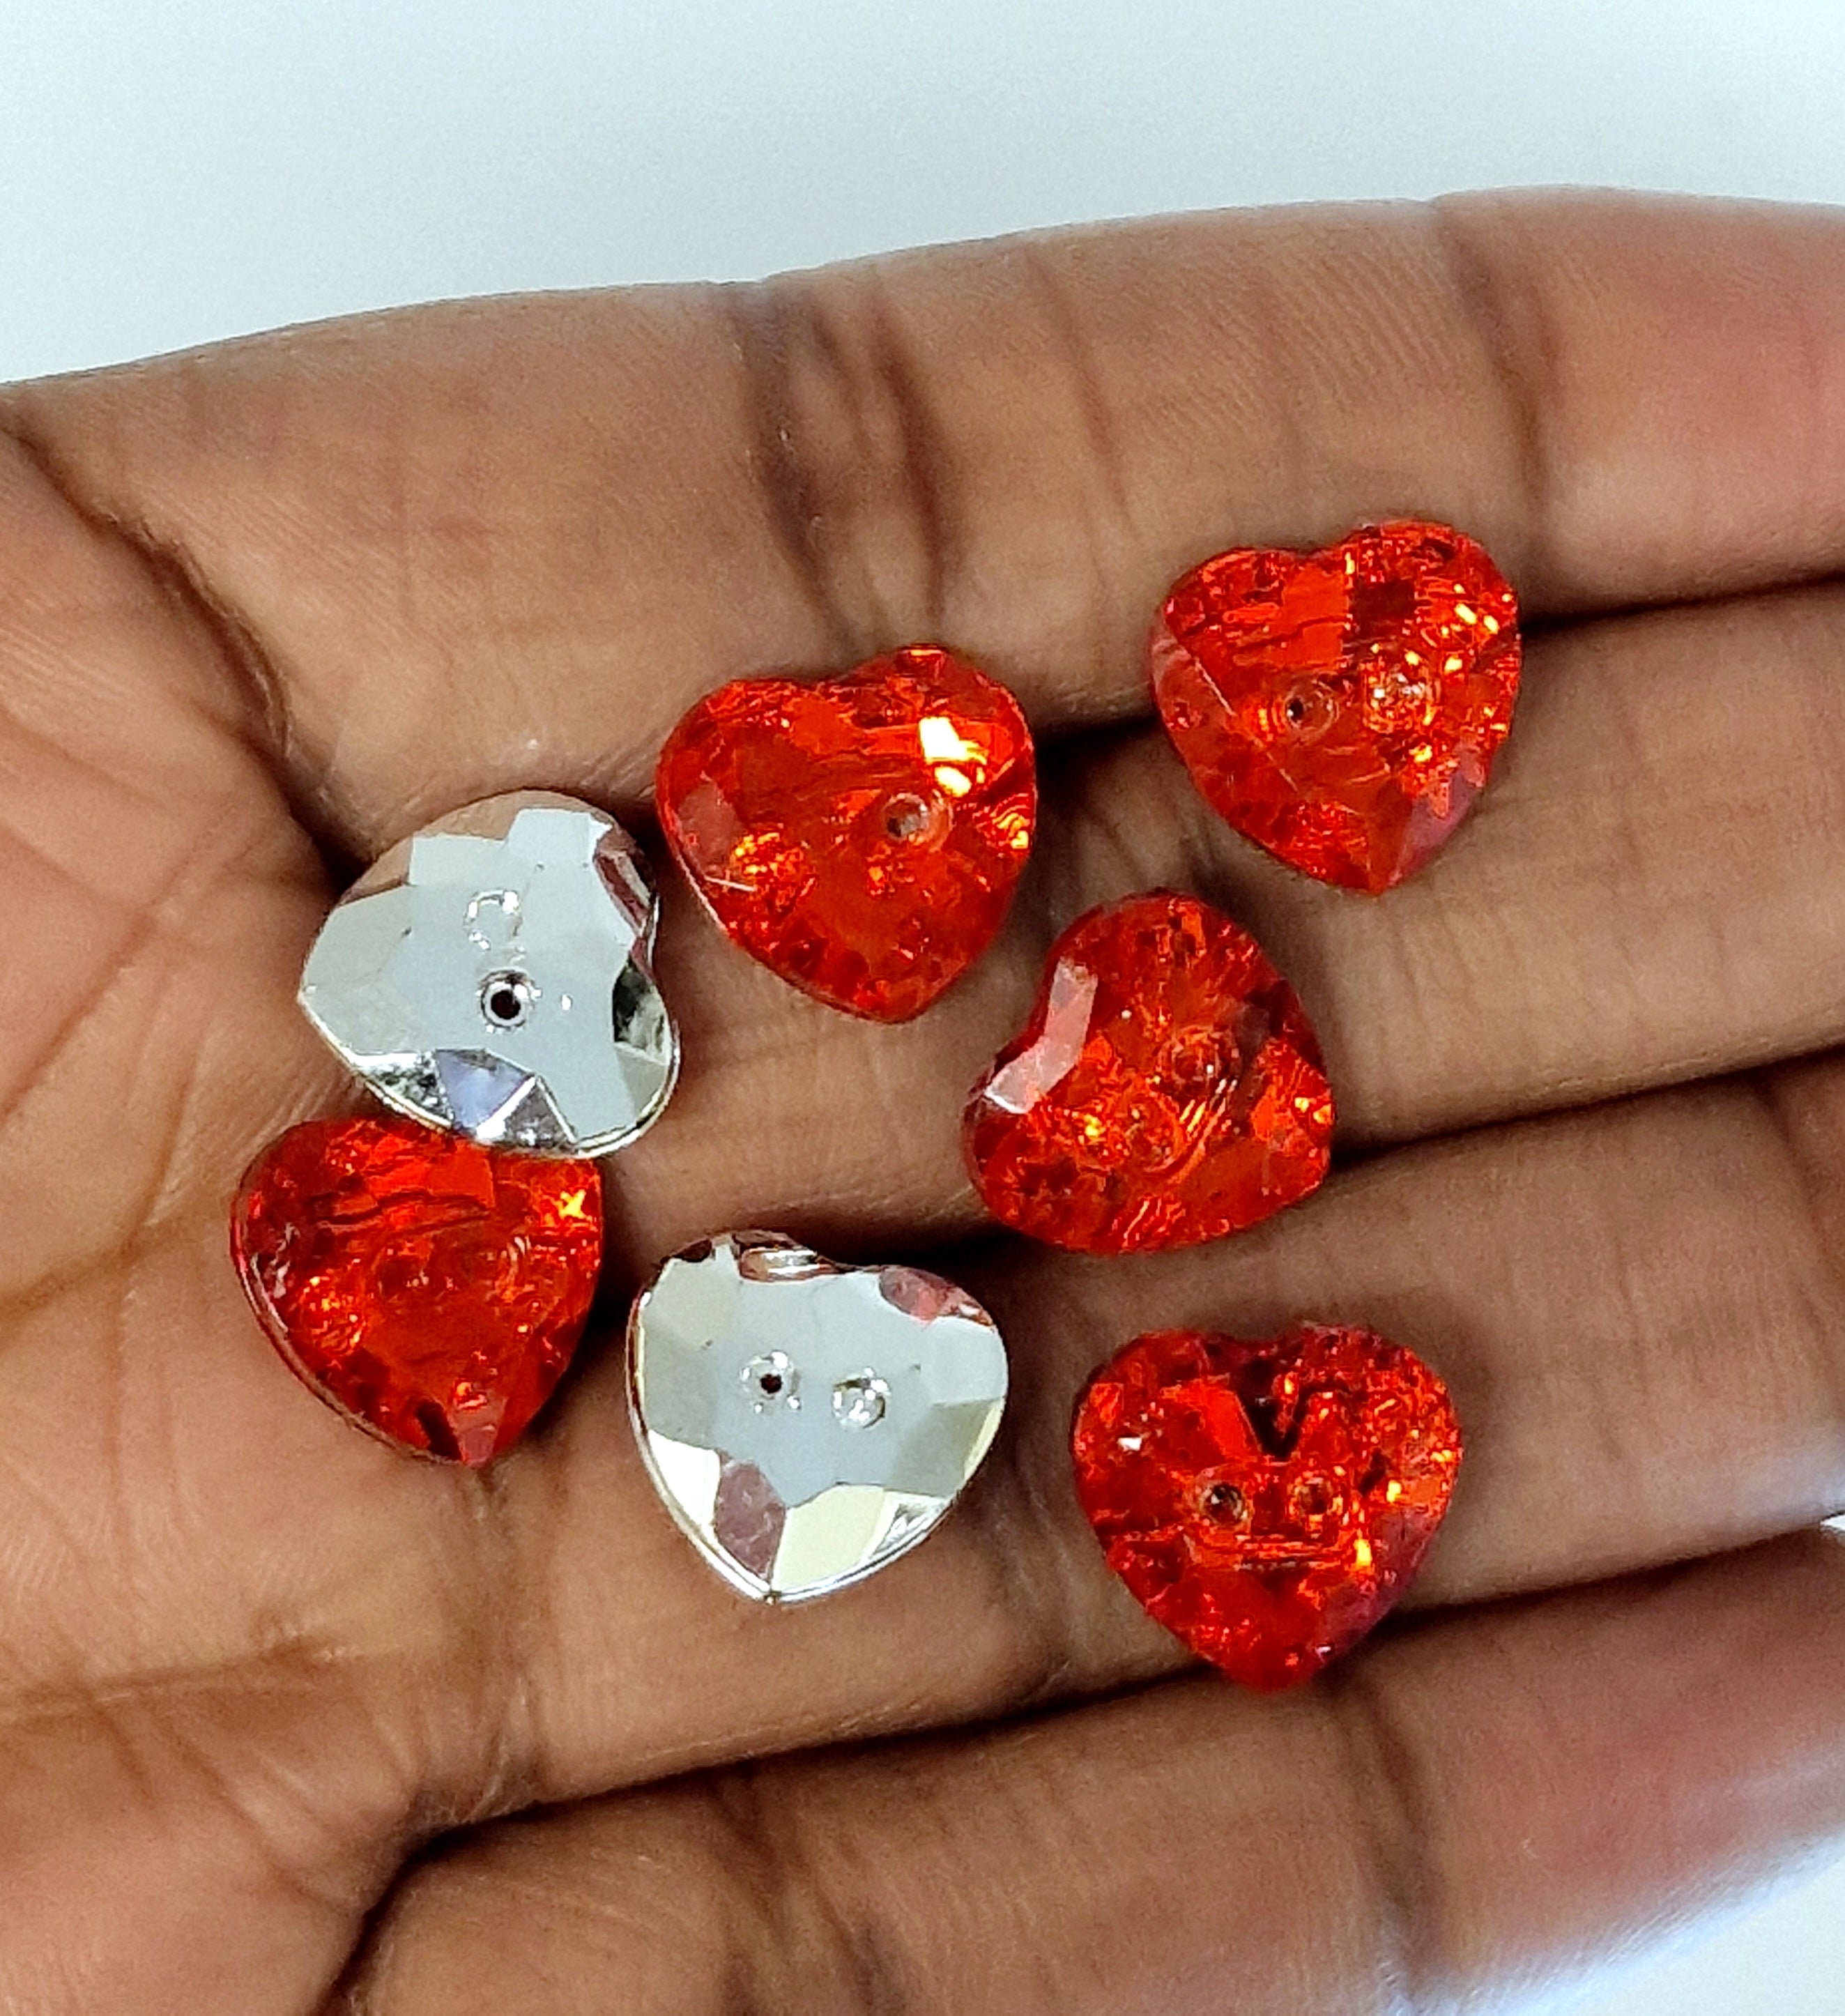 MajorCrafts 44pcs 13mm Ruby Red 2 Holes Heart Small Acrylic Sewing Buttons